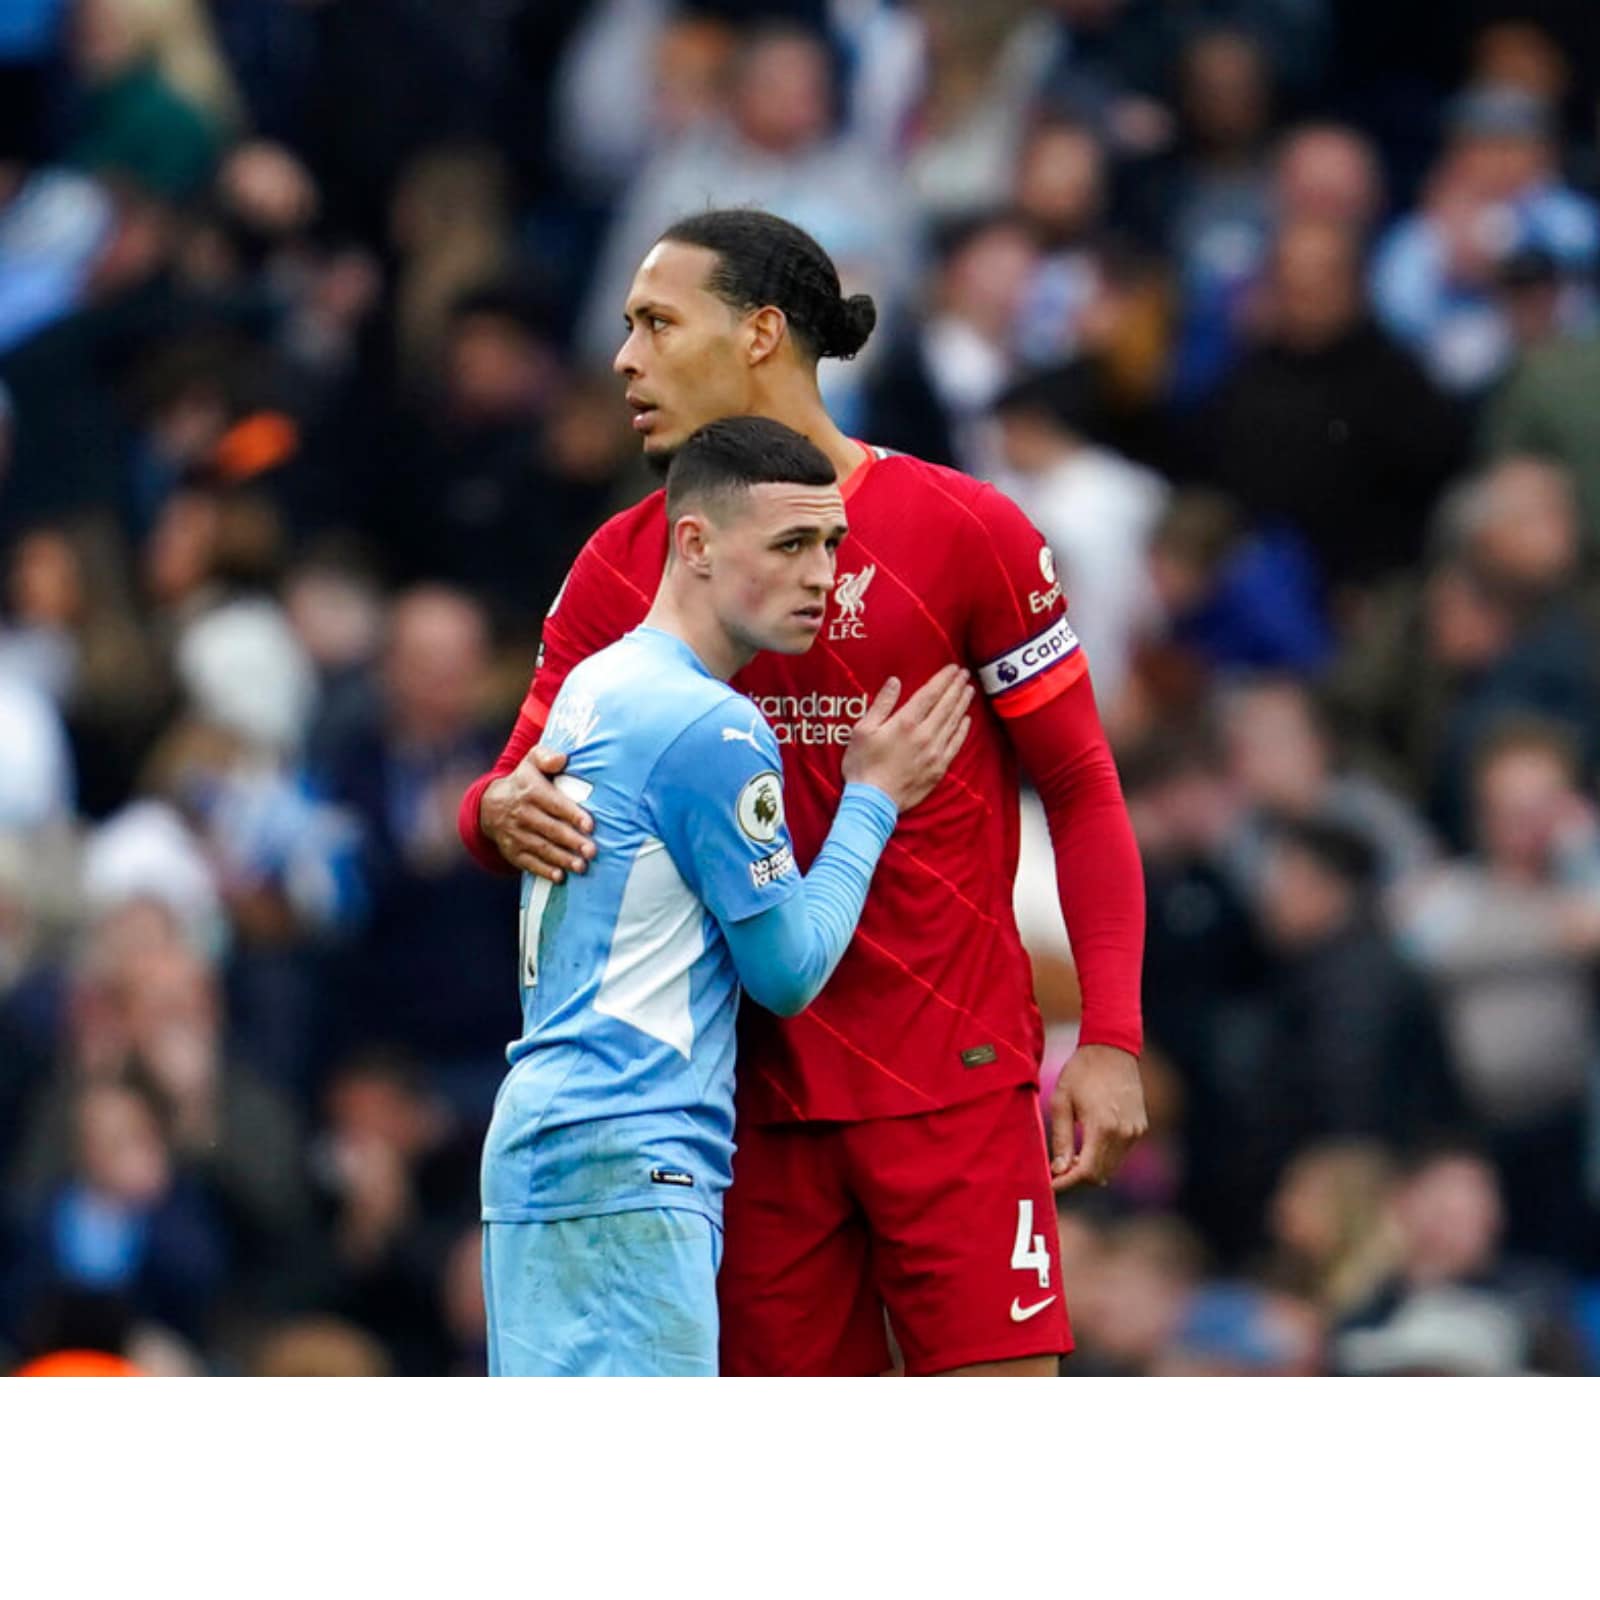 Football Match Today Manchester City, Liverpool Eye UEFA Champions League Semis